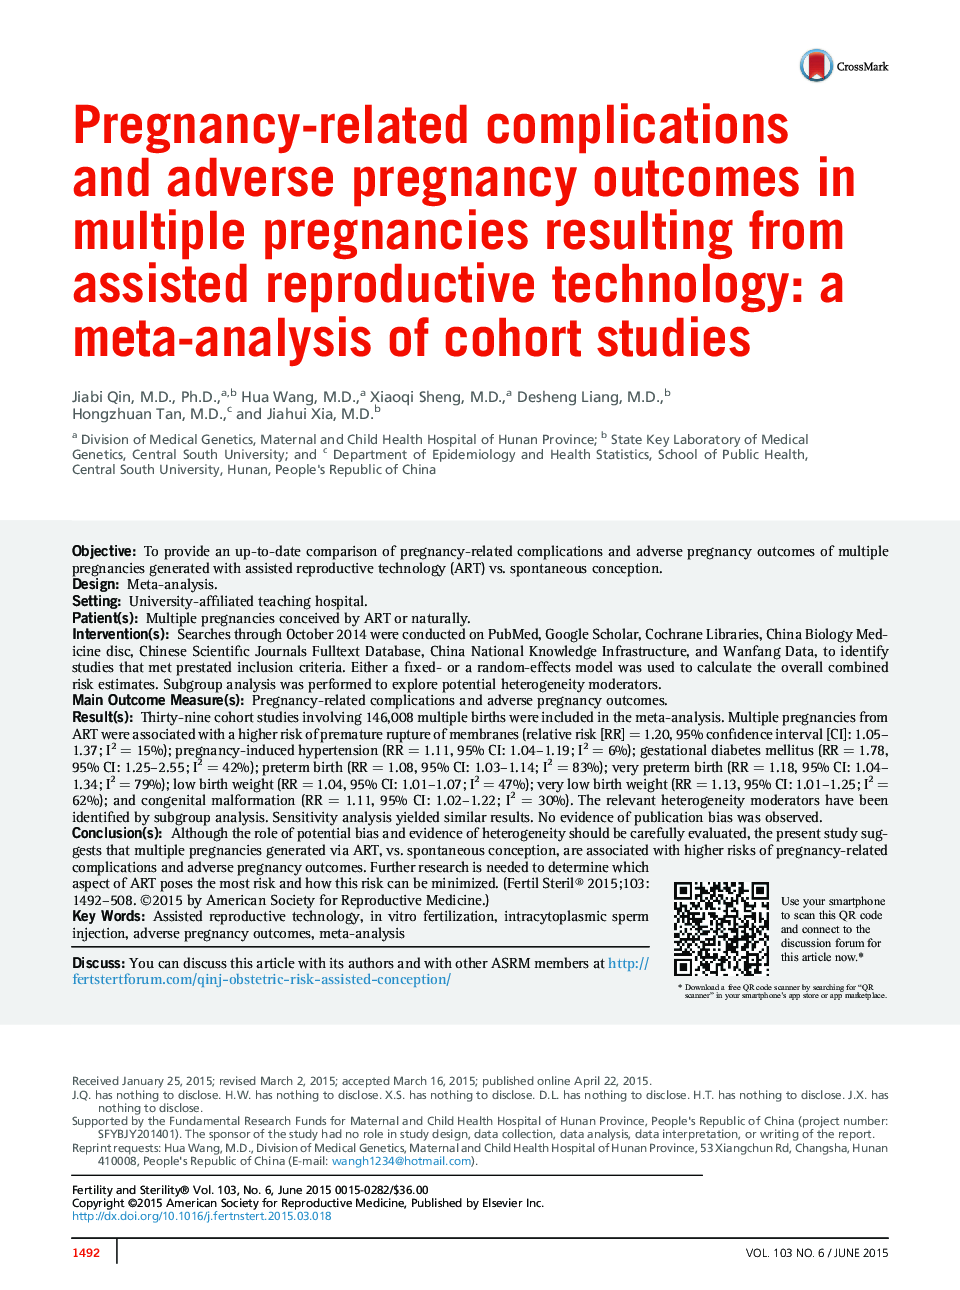 Pregnancy-related complications and adverse pregnancy outcomes in multiple pregnancies resulting from assisted reproductive technology: a meta-analysis of cohort studies